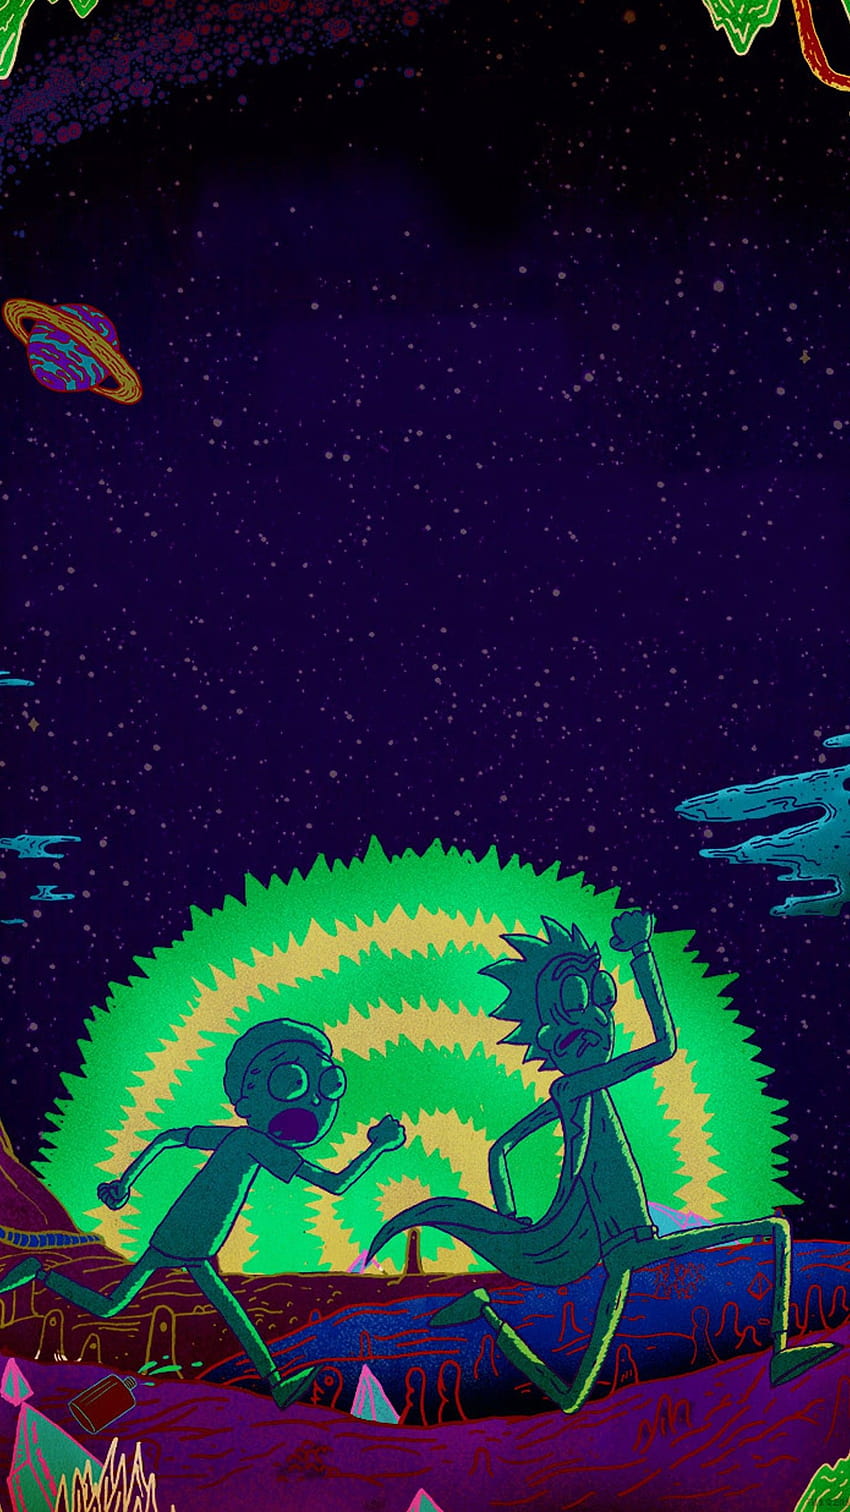 Rick and Morty Trippy on Dog, rick and morty portal iphone HD phone wallpaper